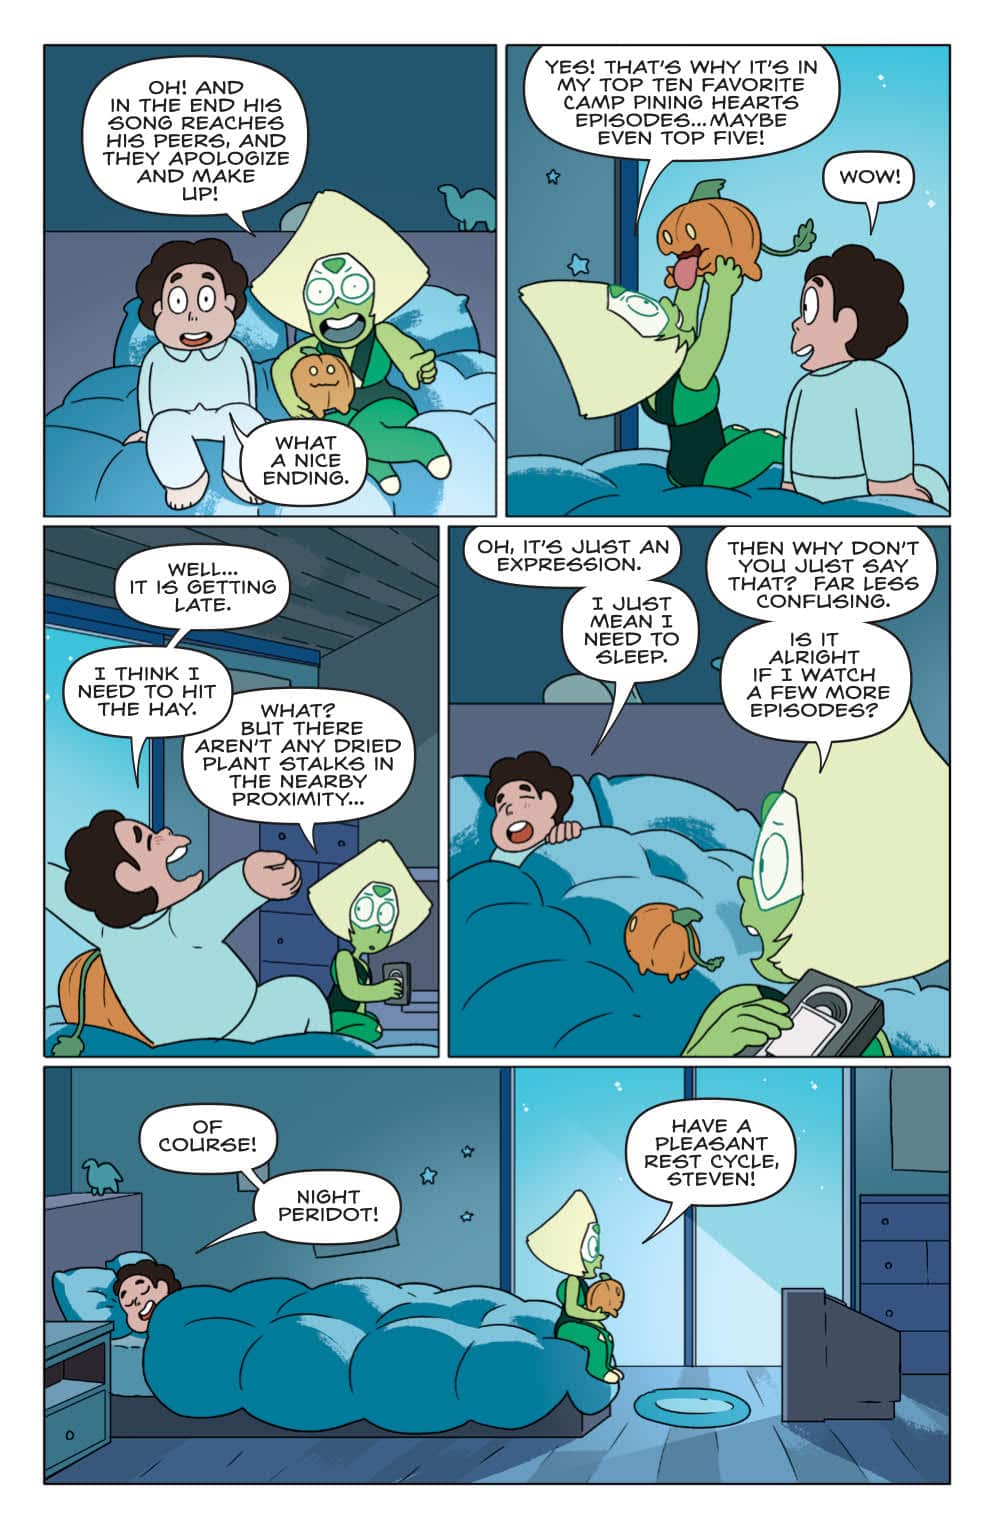 Sex graphicpolicy: Steven Universe #21 Publisher: pictures